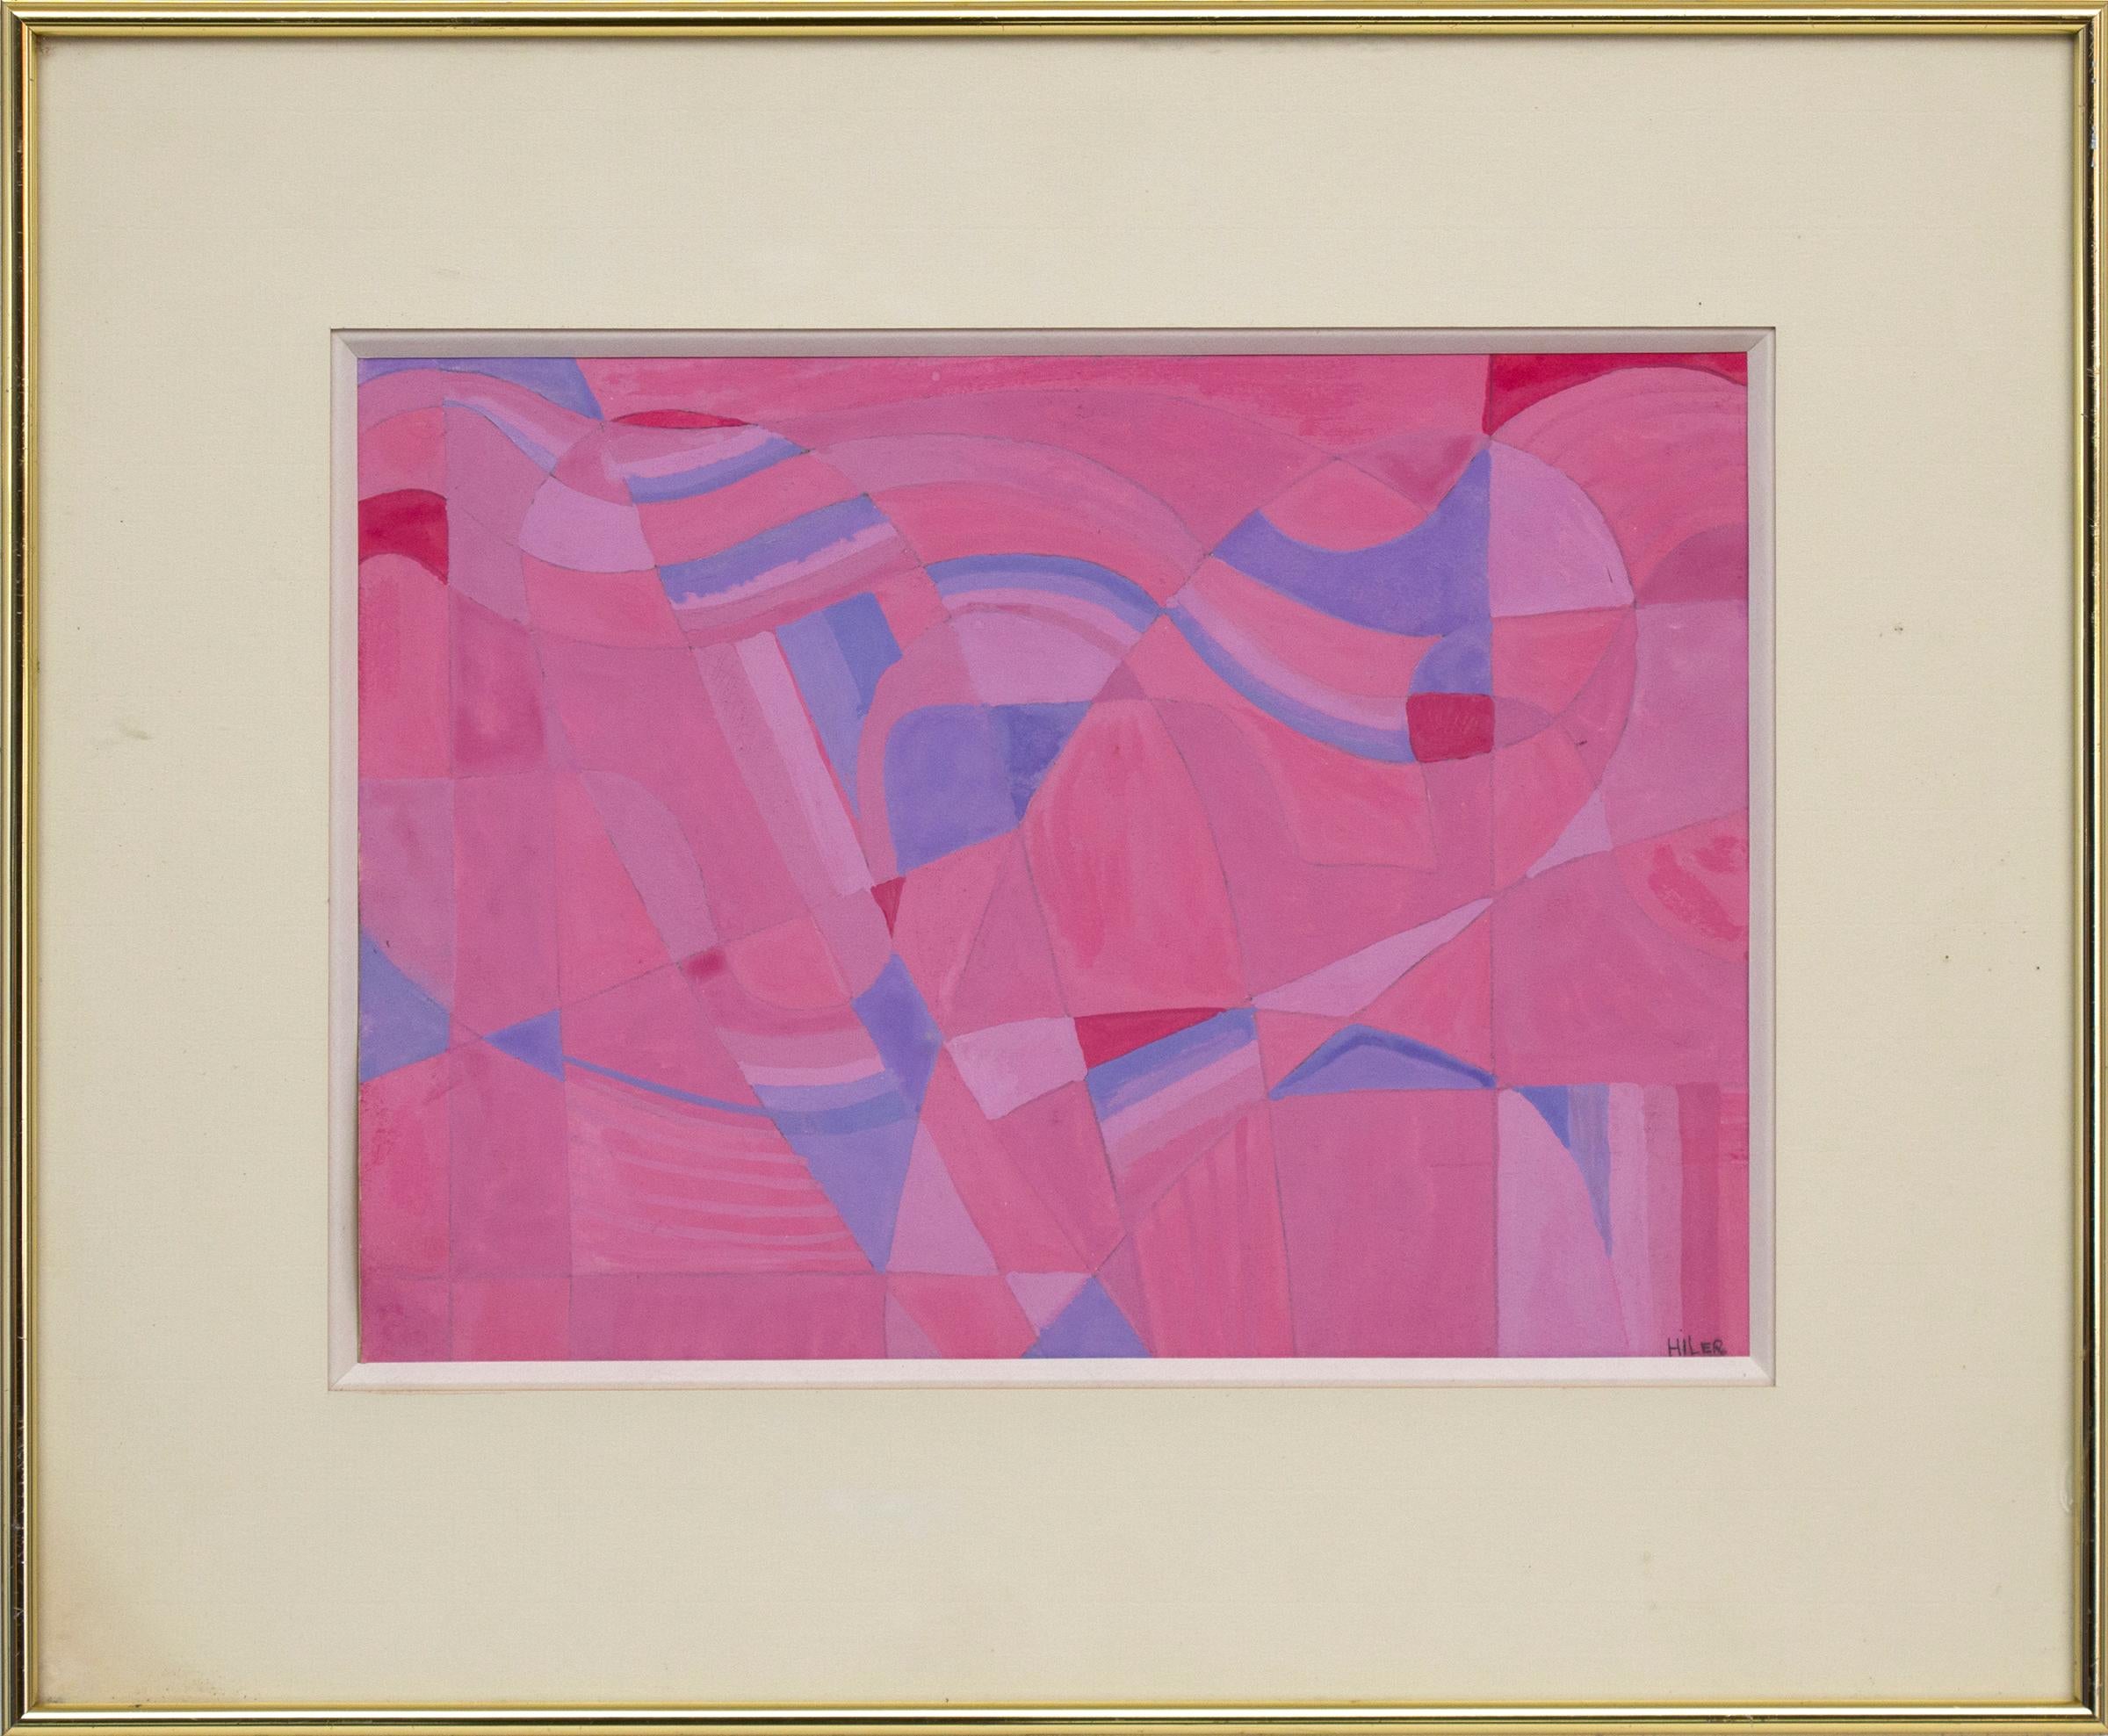 Pink Study, 1960s Abstract Painting in Pink & Blue, Mid Century Modern  - Mixed Media Art by Hilaire Hiler